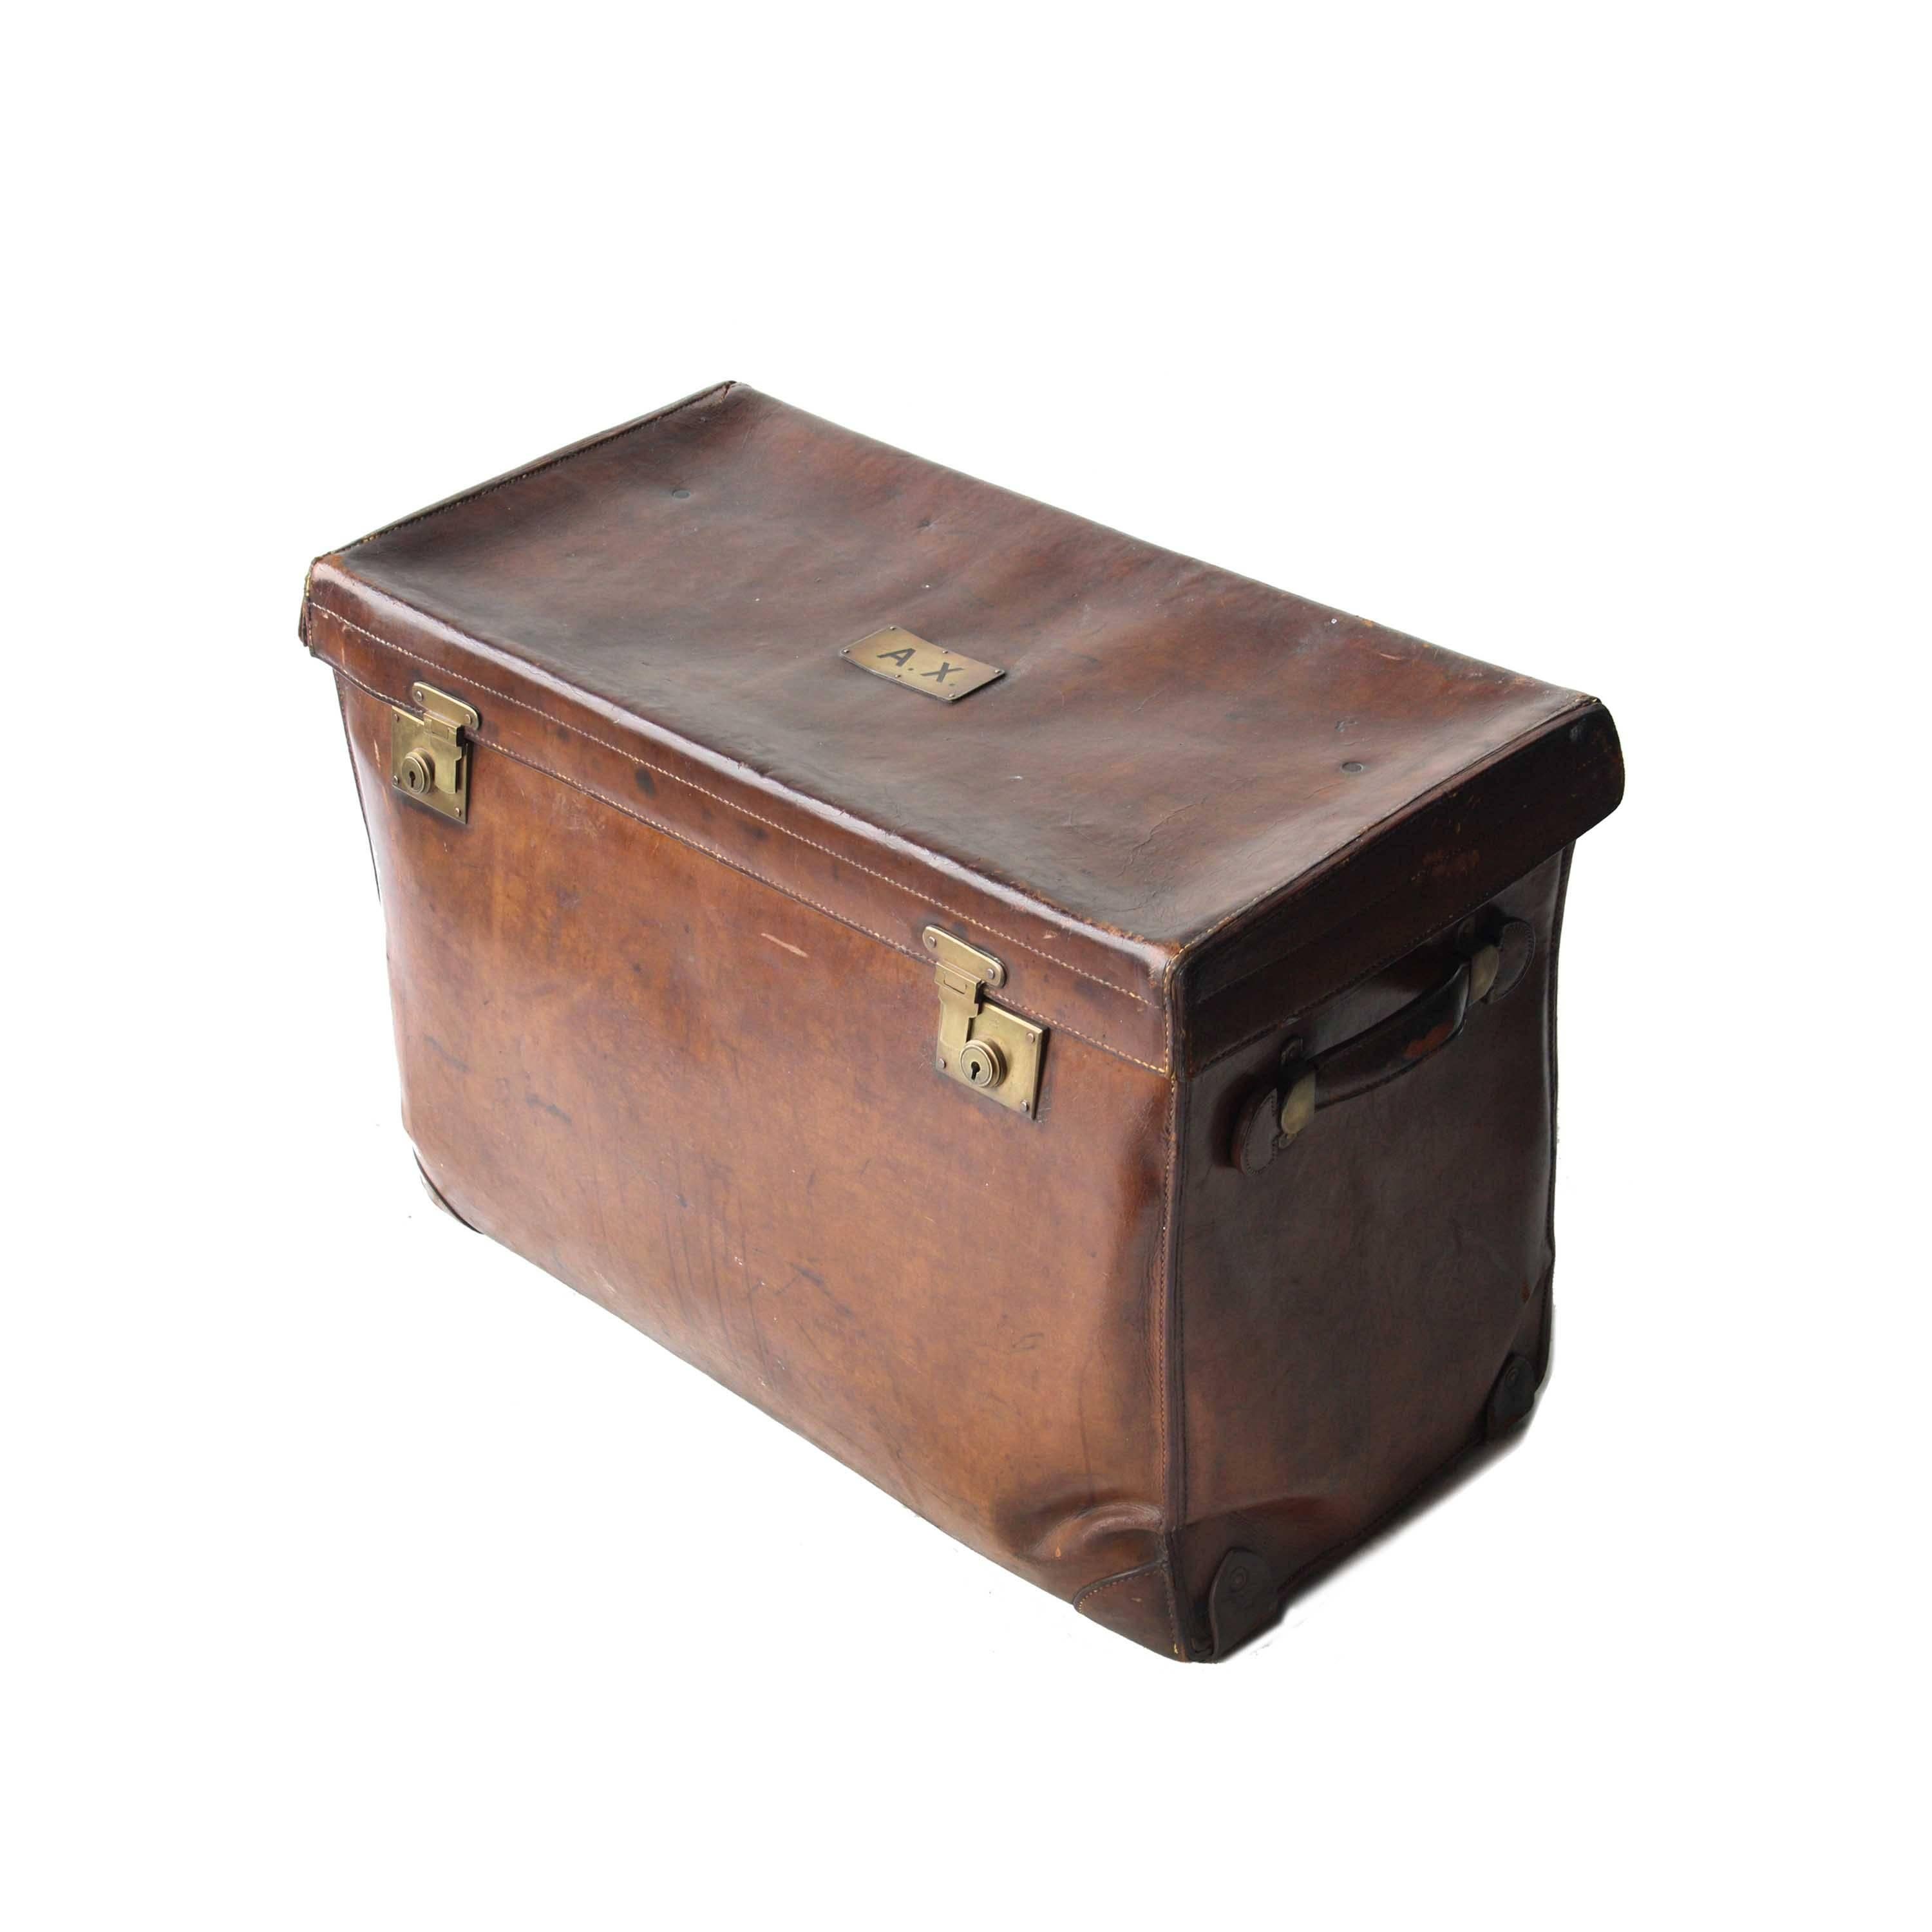 Cargo chest made of leather with brass plate with initials engraved on top lid, origin seal inside.